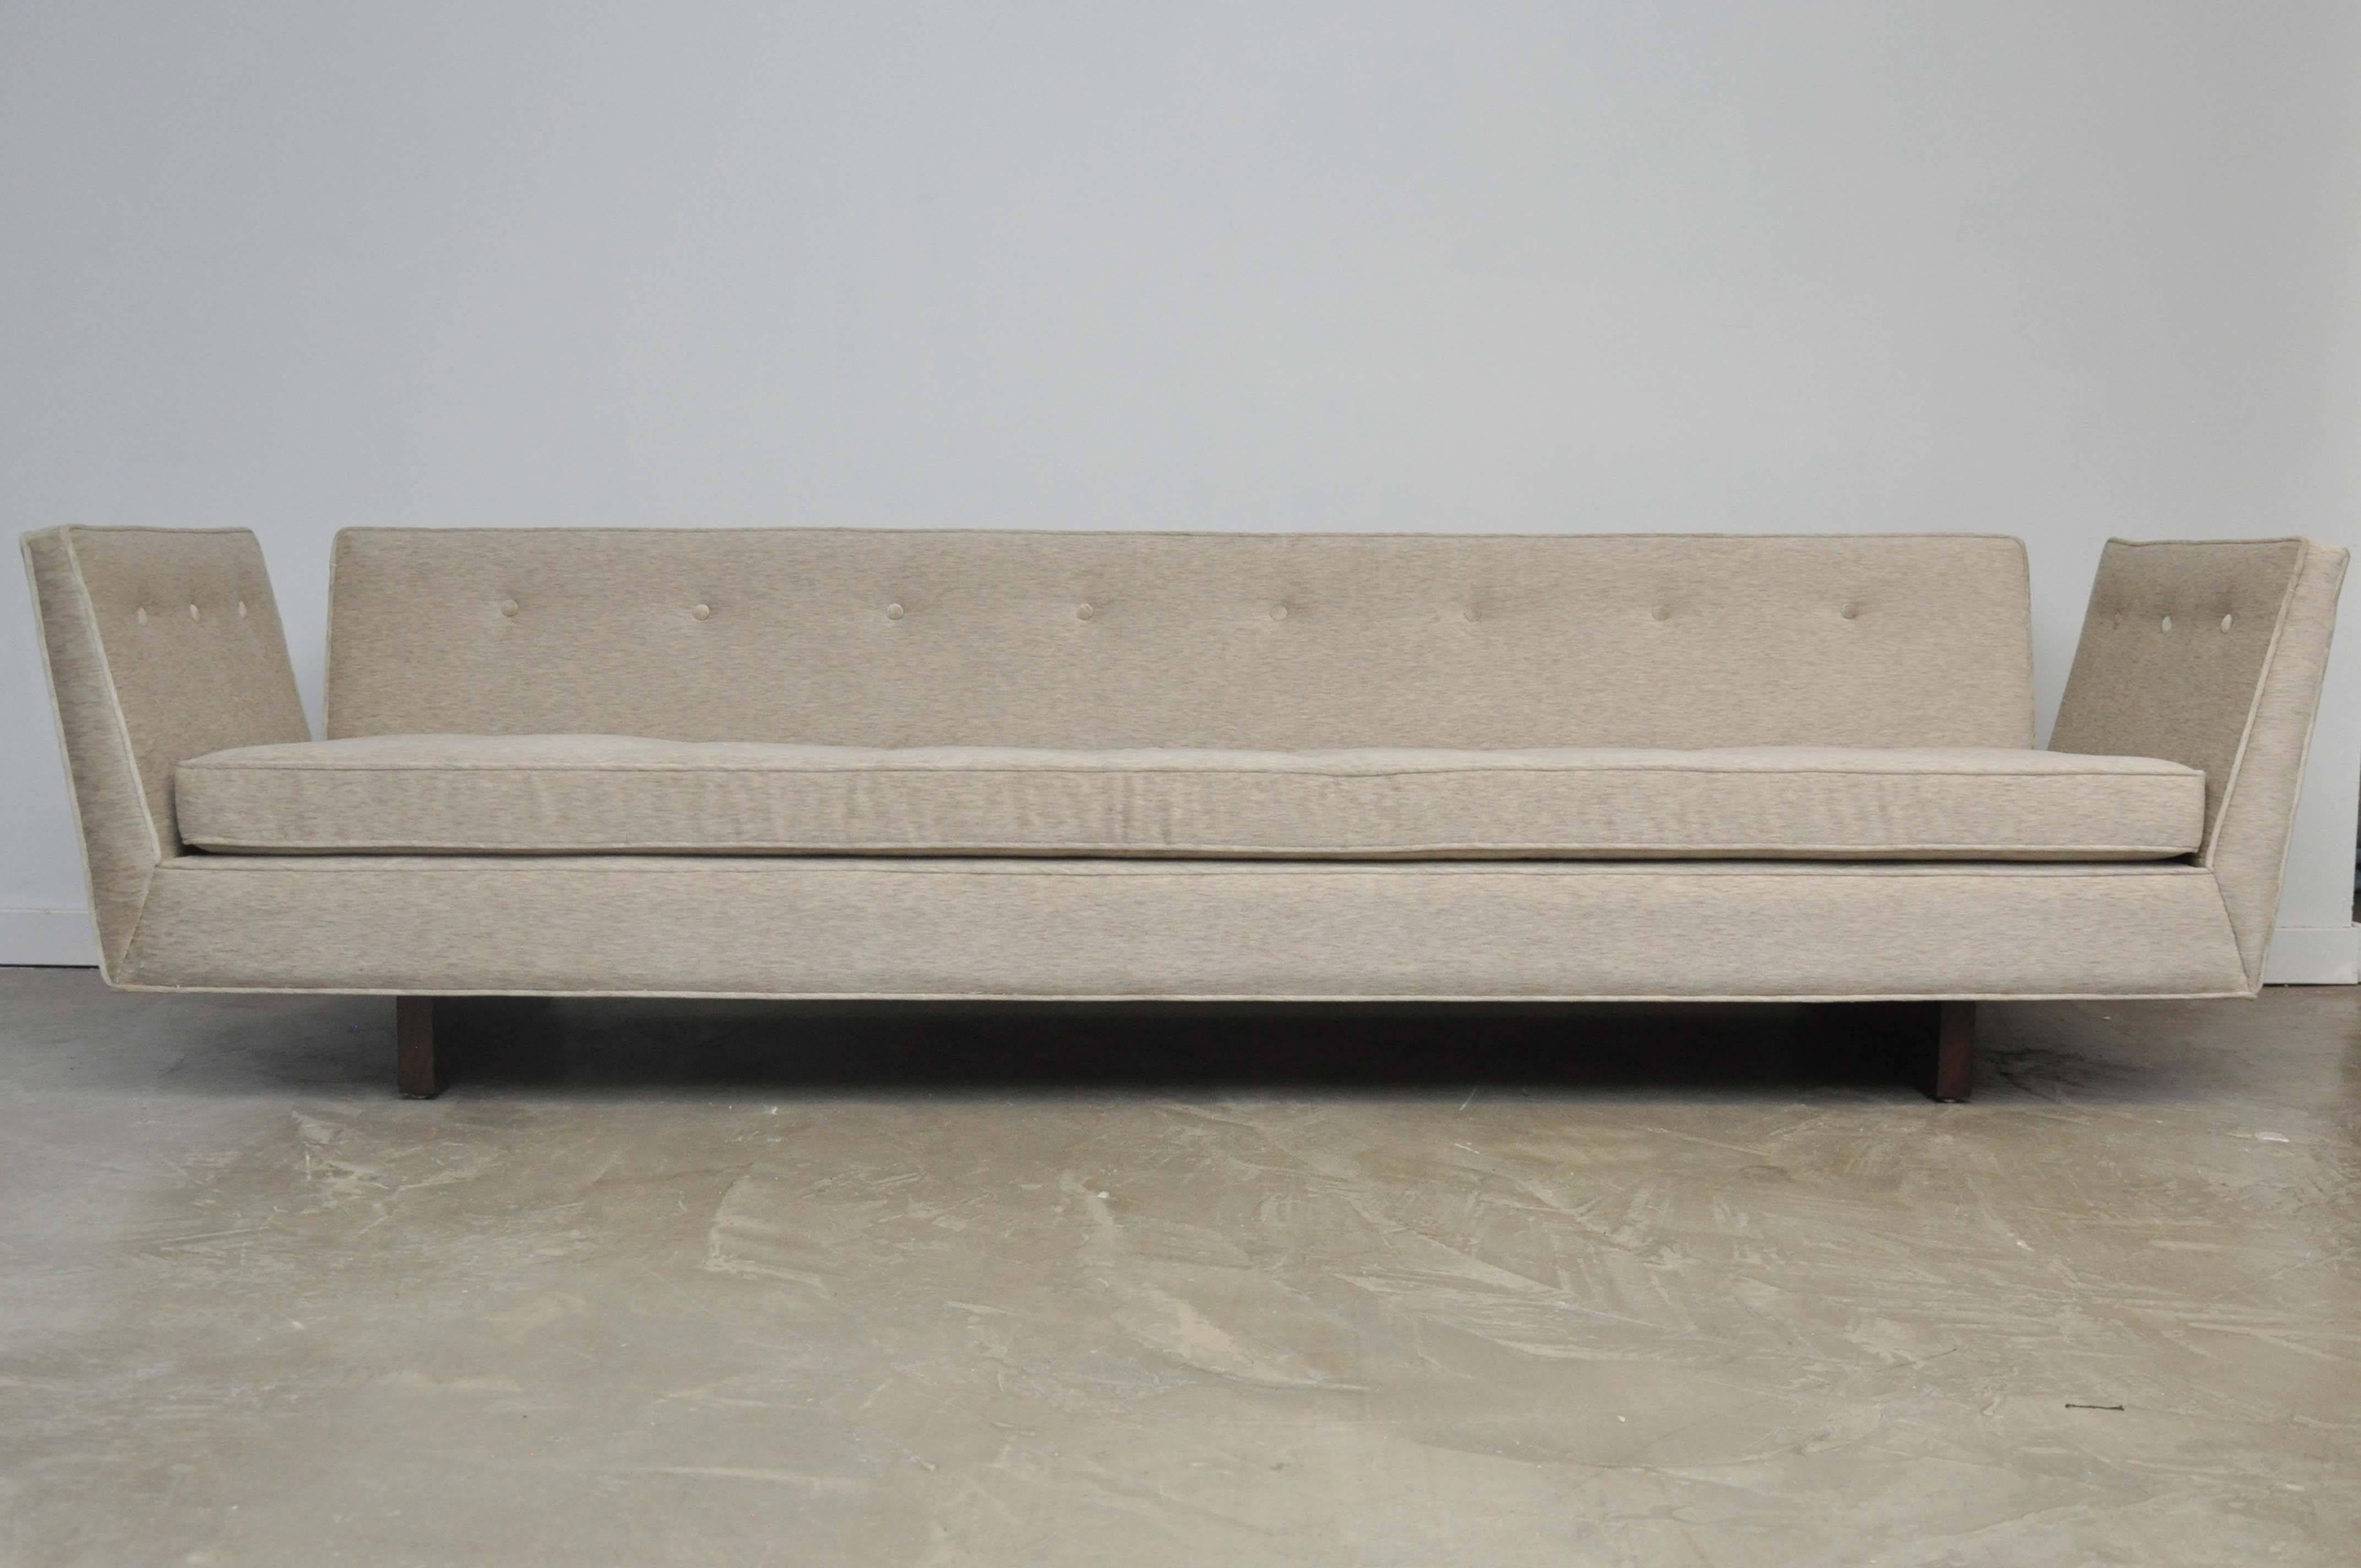 Large-scale open-arm sofa by Edward Wormley for Dunbar. Sculptural form sofa with exposed walnut legs coming up the back side of sofa. Fully restored and reupholstered in Italian velvet.